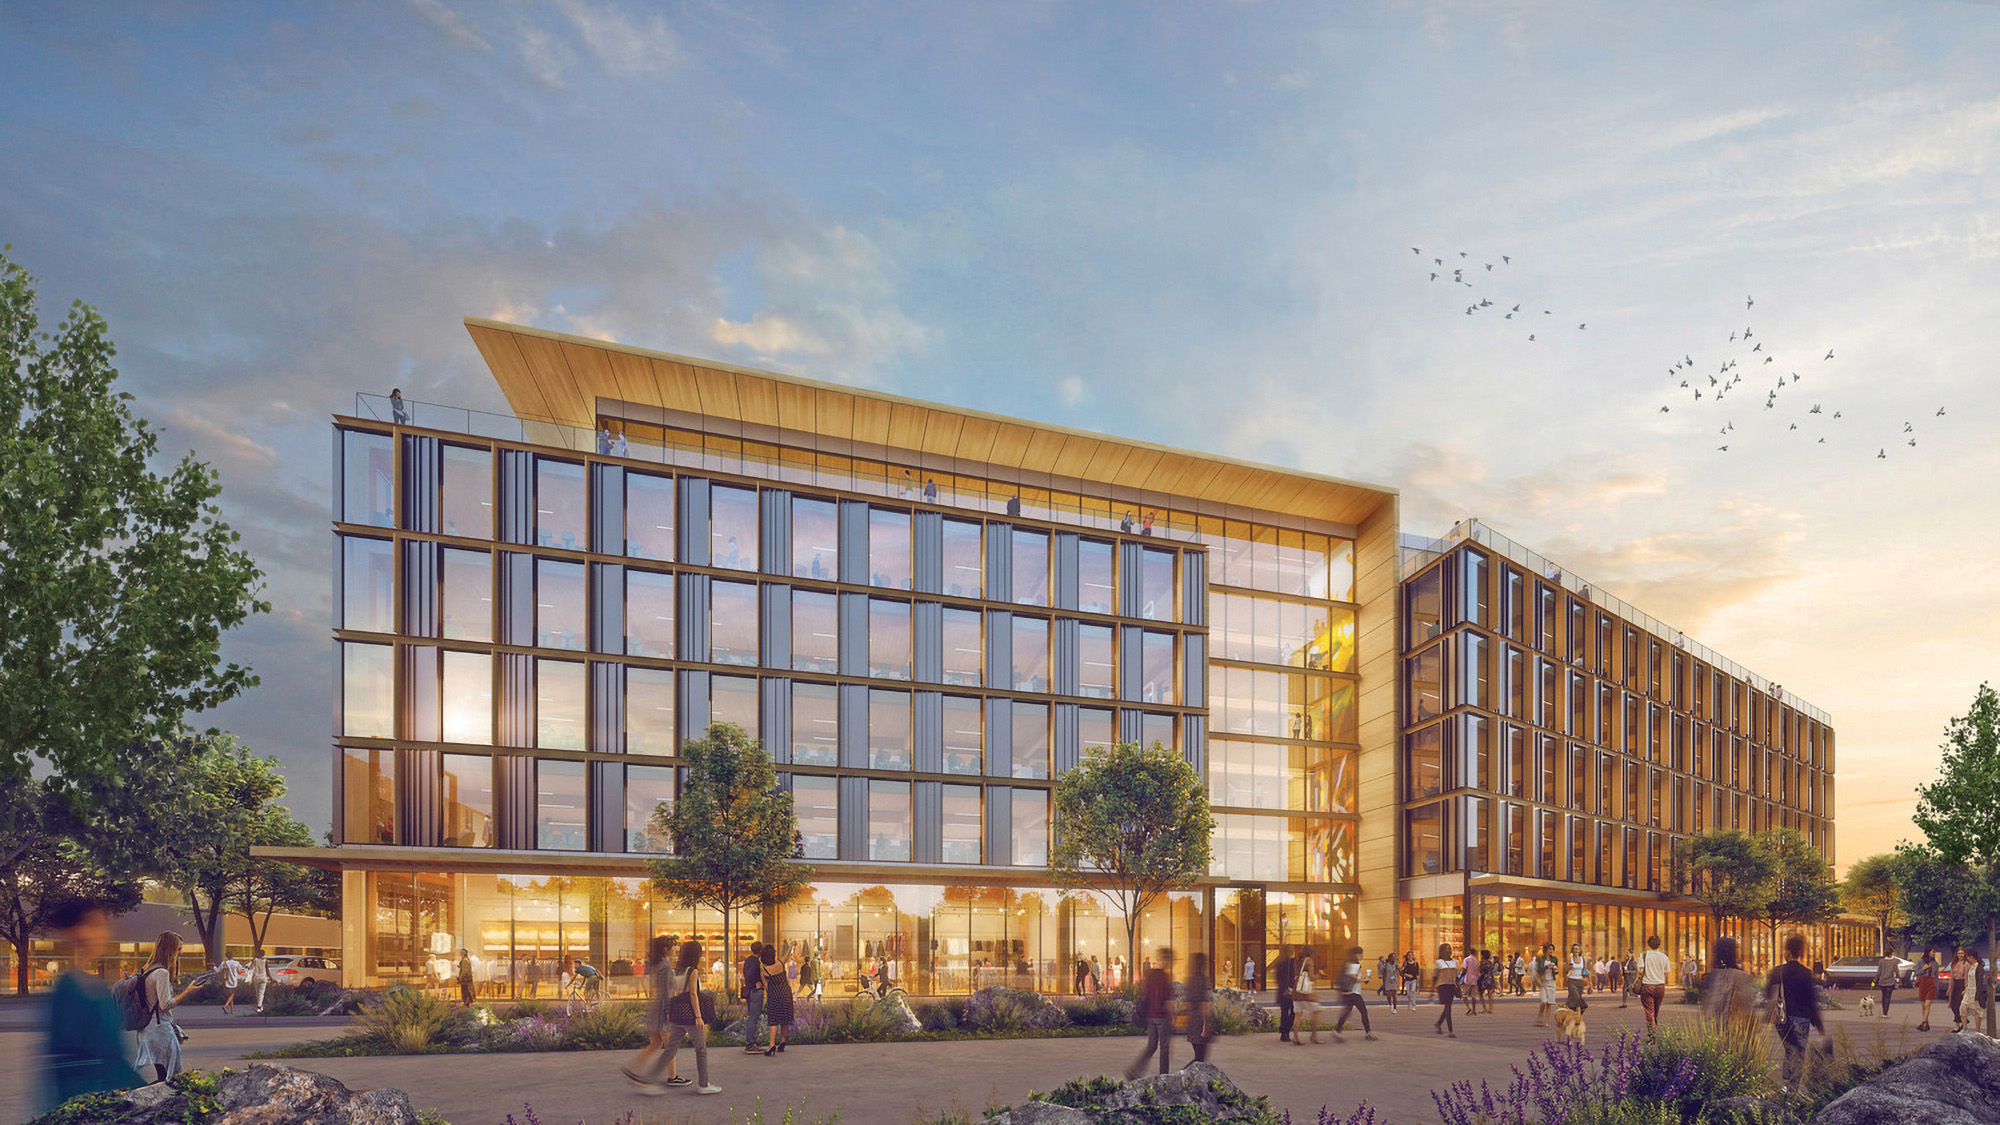 100 Rock Row first mass timber structure in Maine